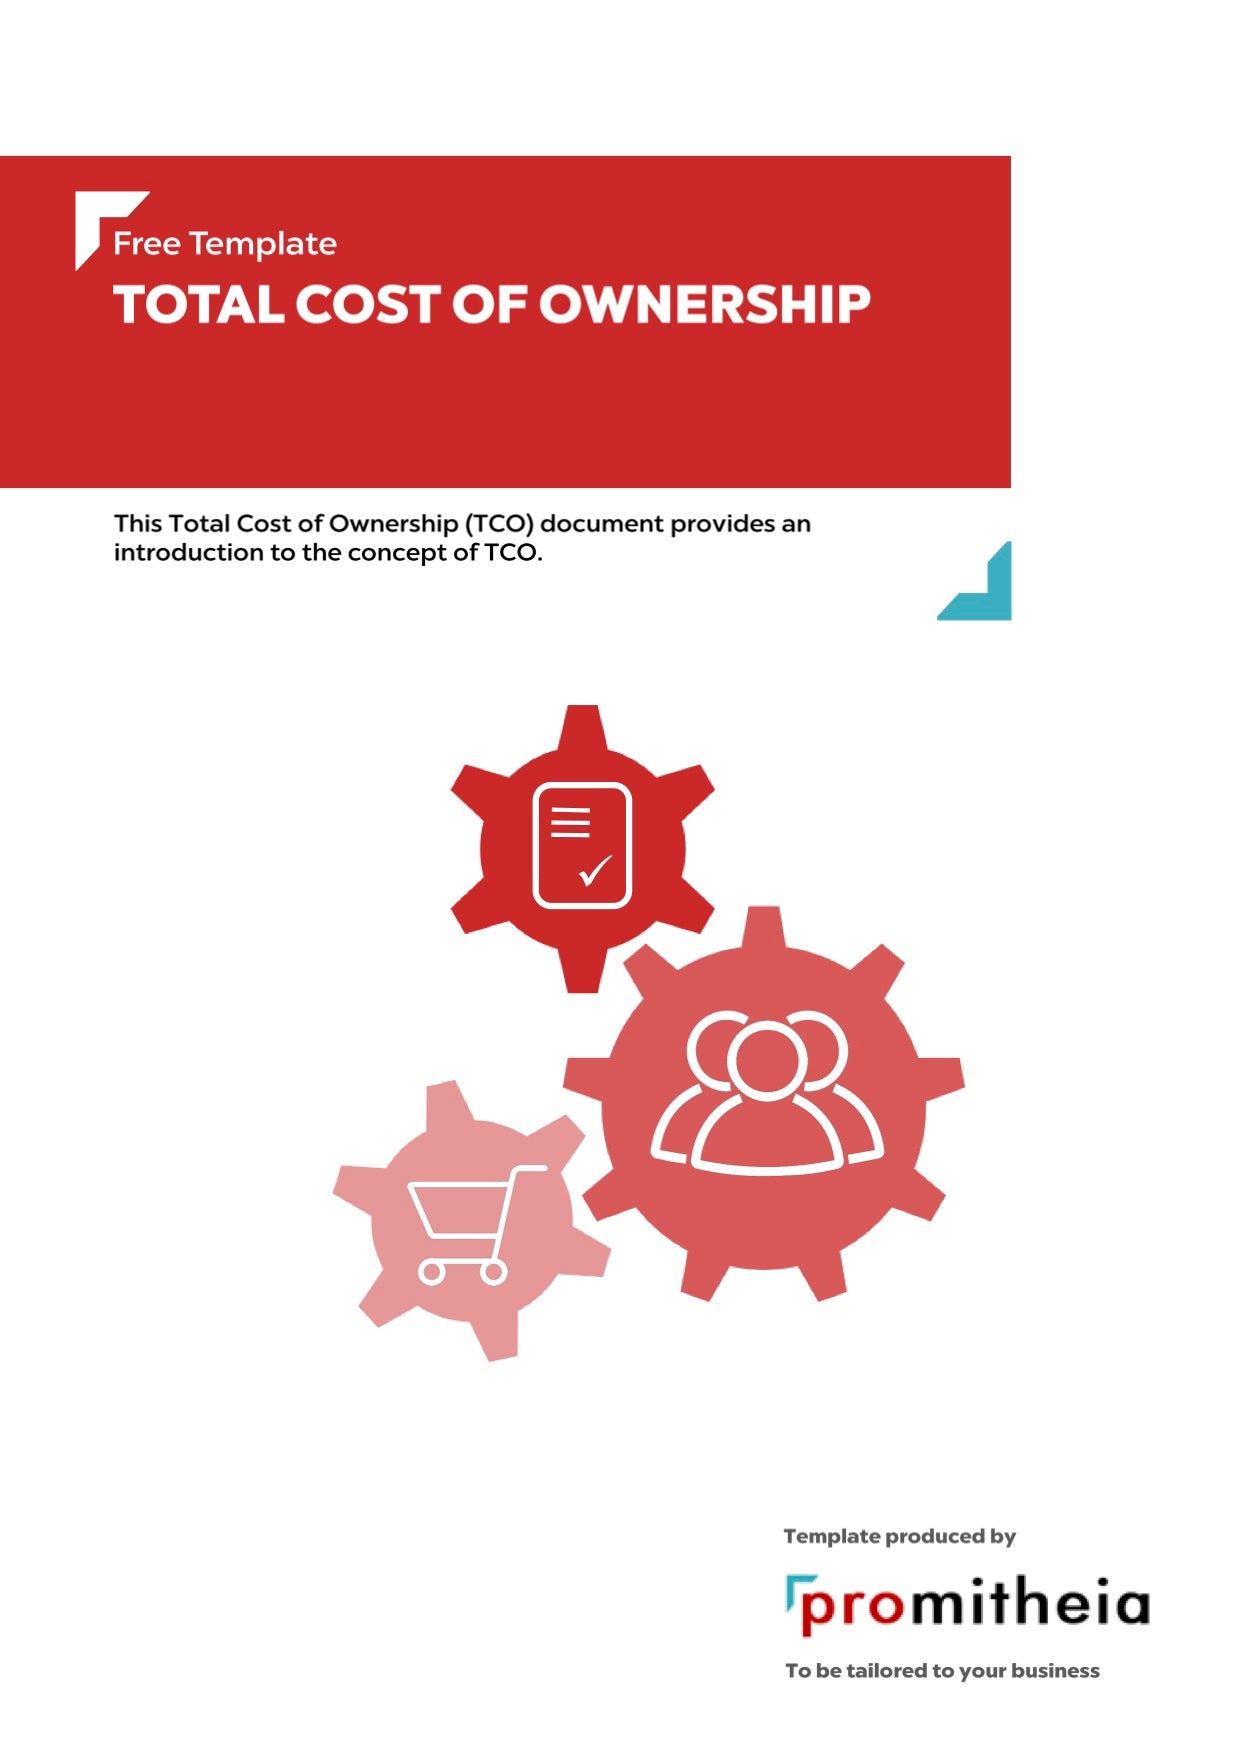 Total Cost of Ownership (TCO)